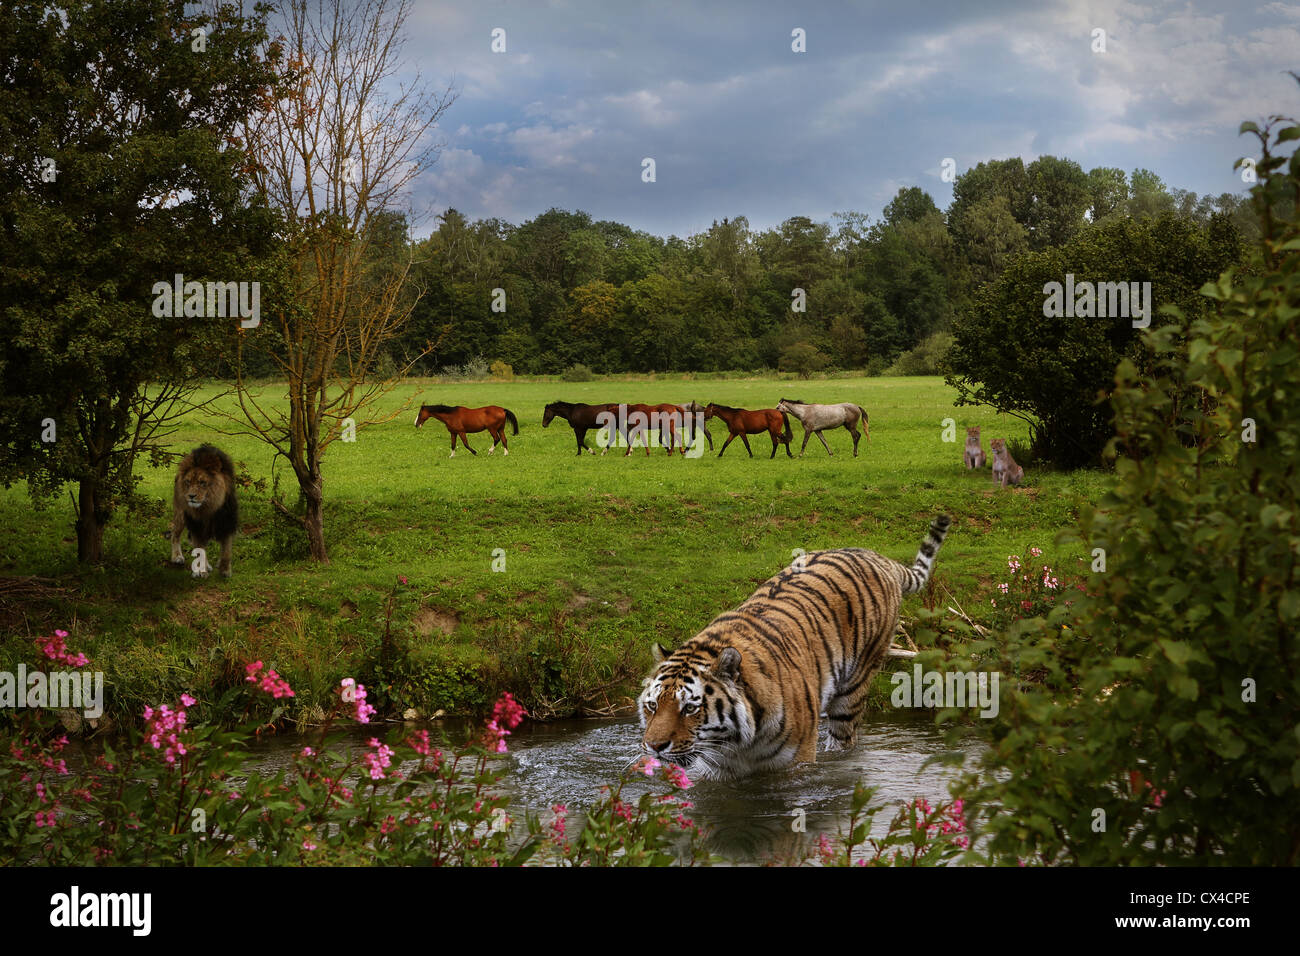 Wilderness, horses, lion and tiger in the same landscape Stock Photo